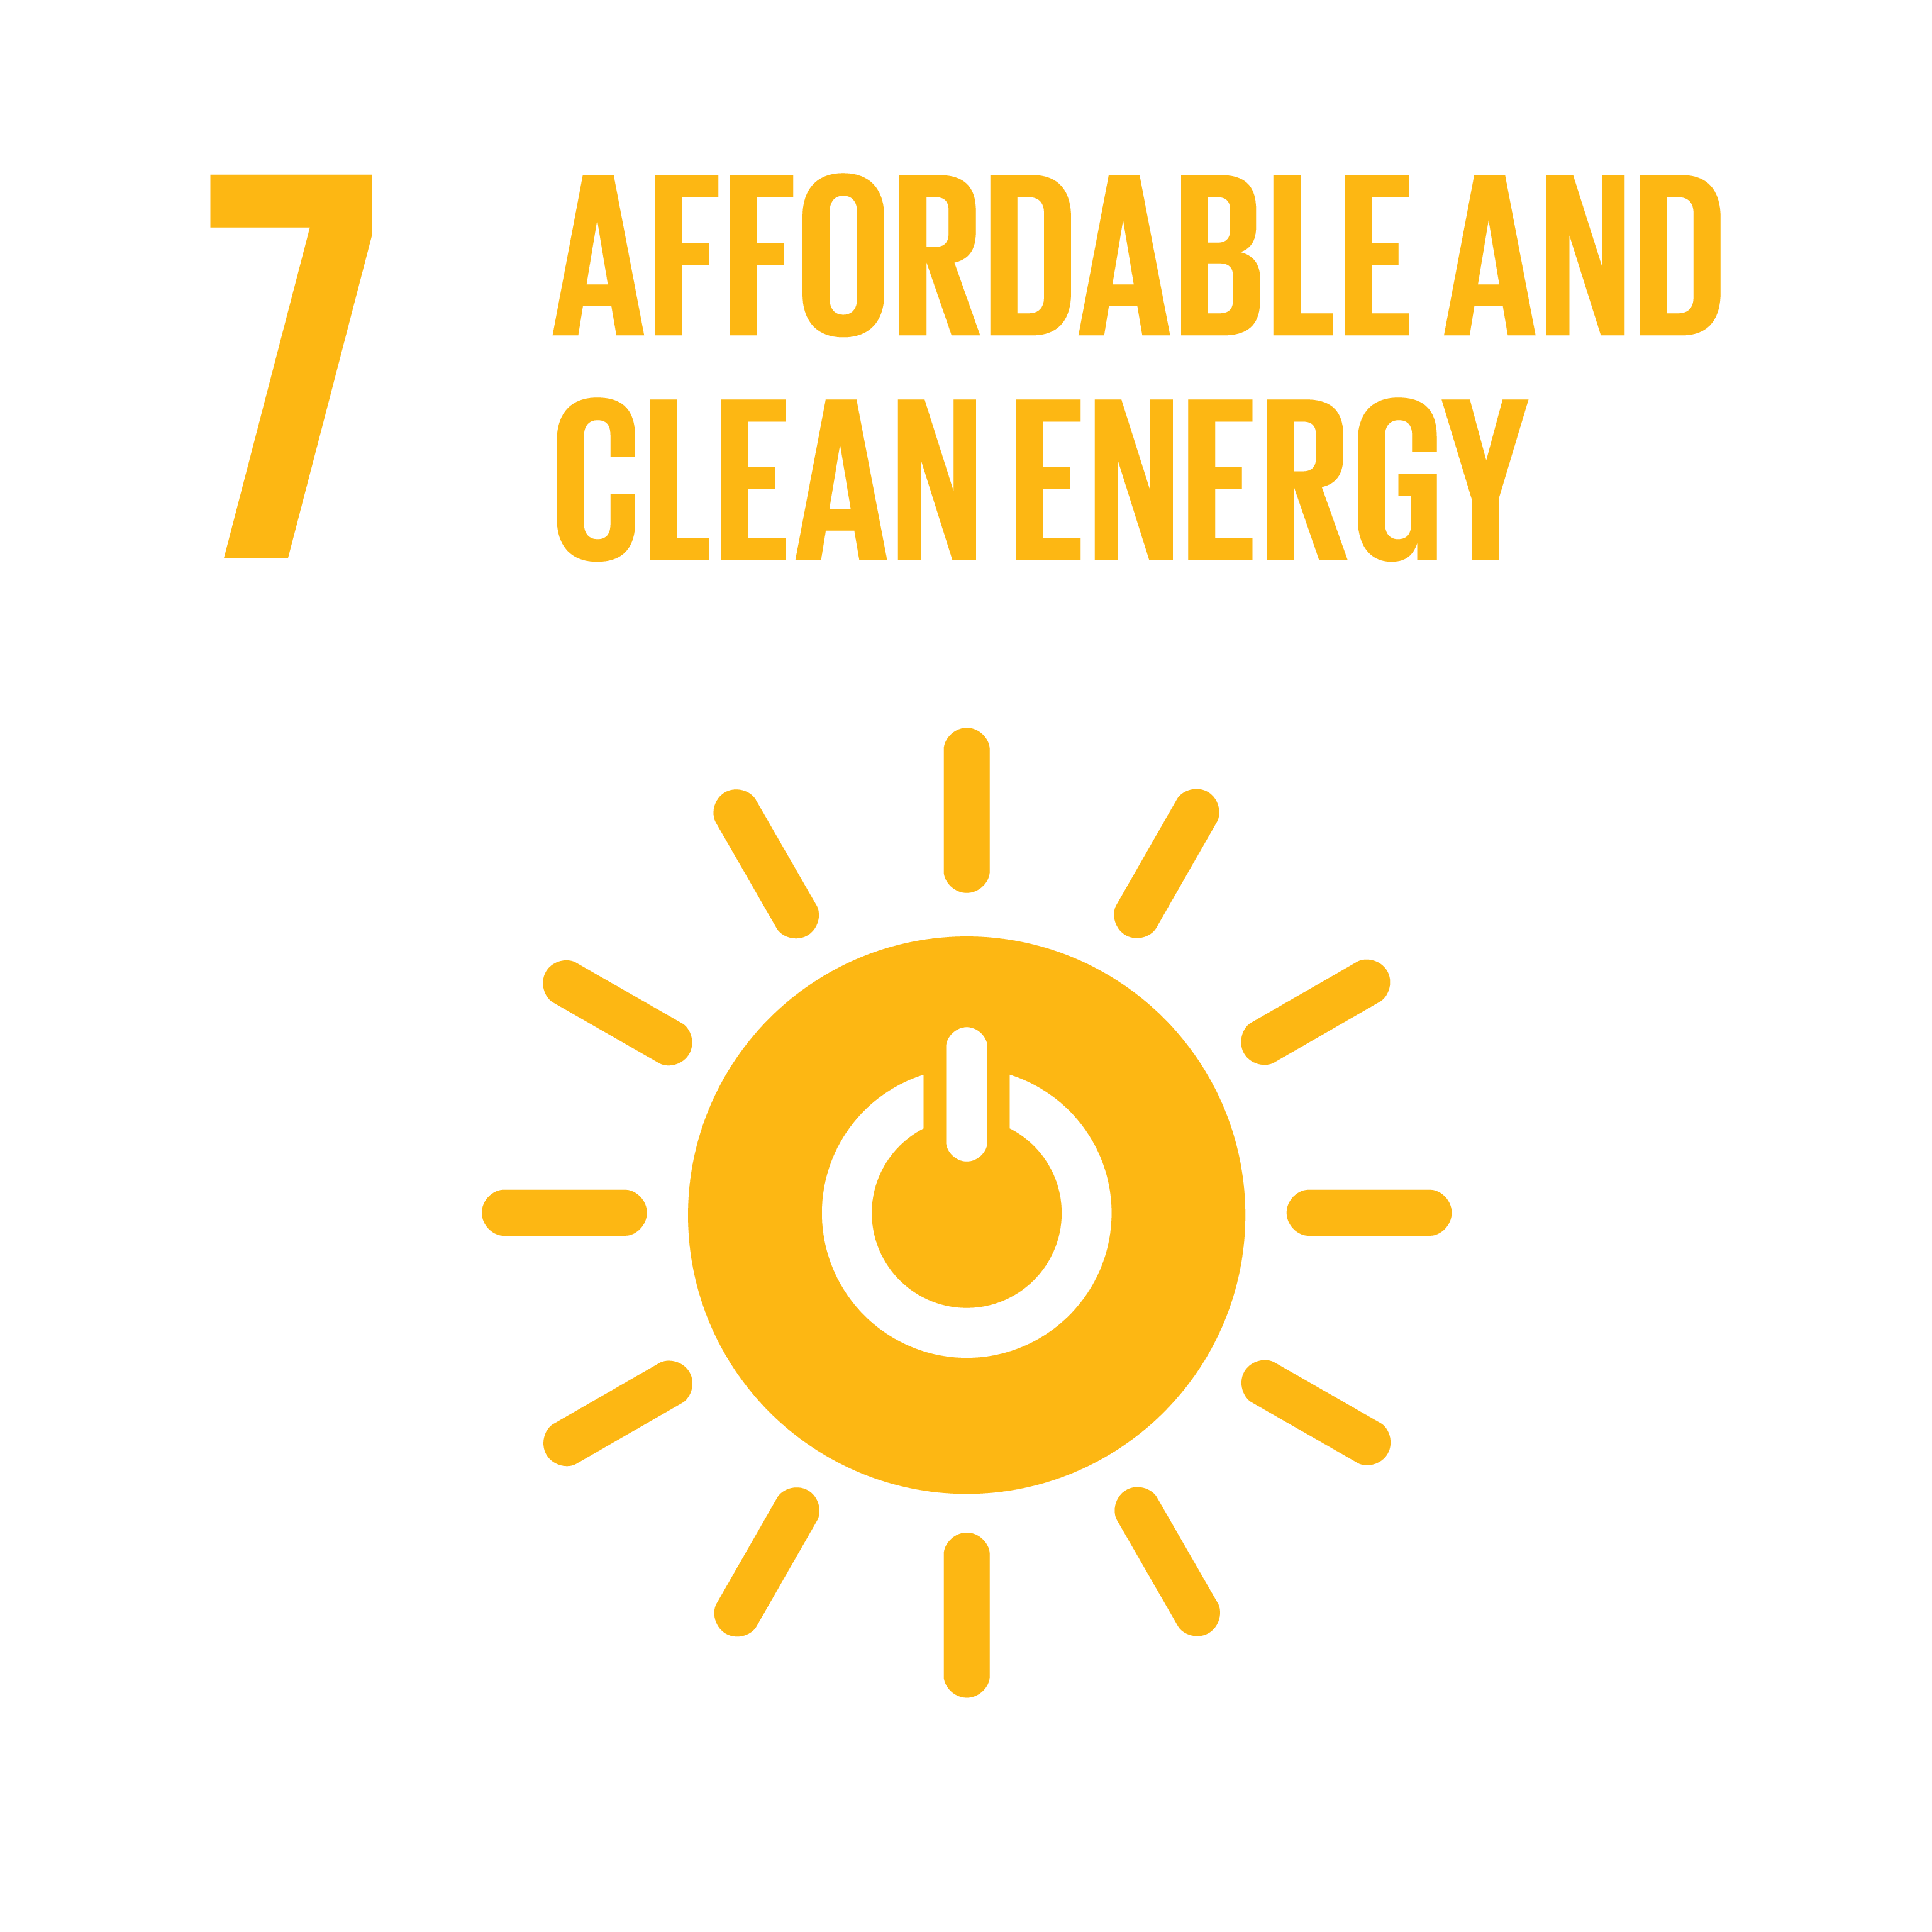 Ensure access to affordable, reliable, sustainable and modern energy for all